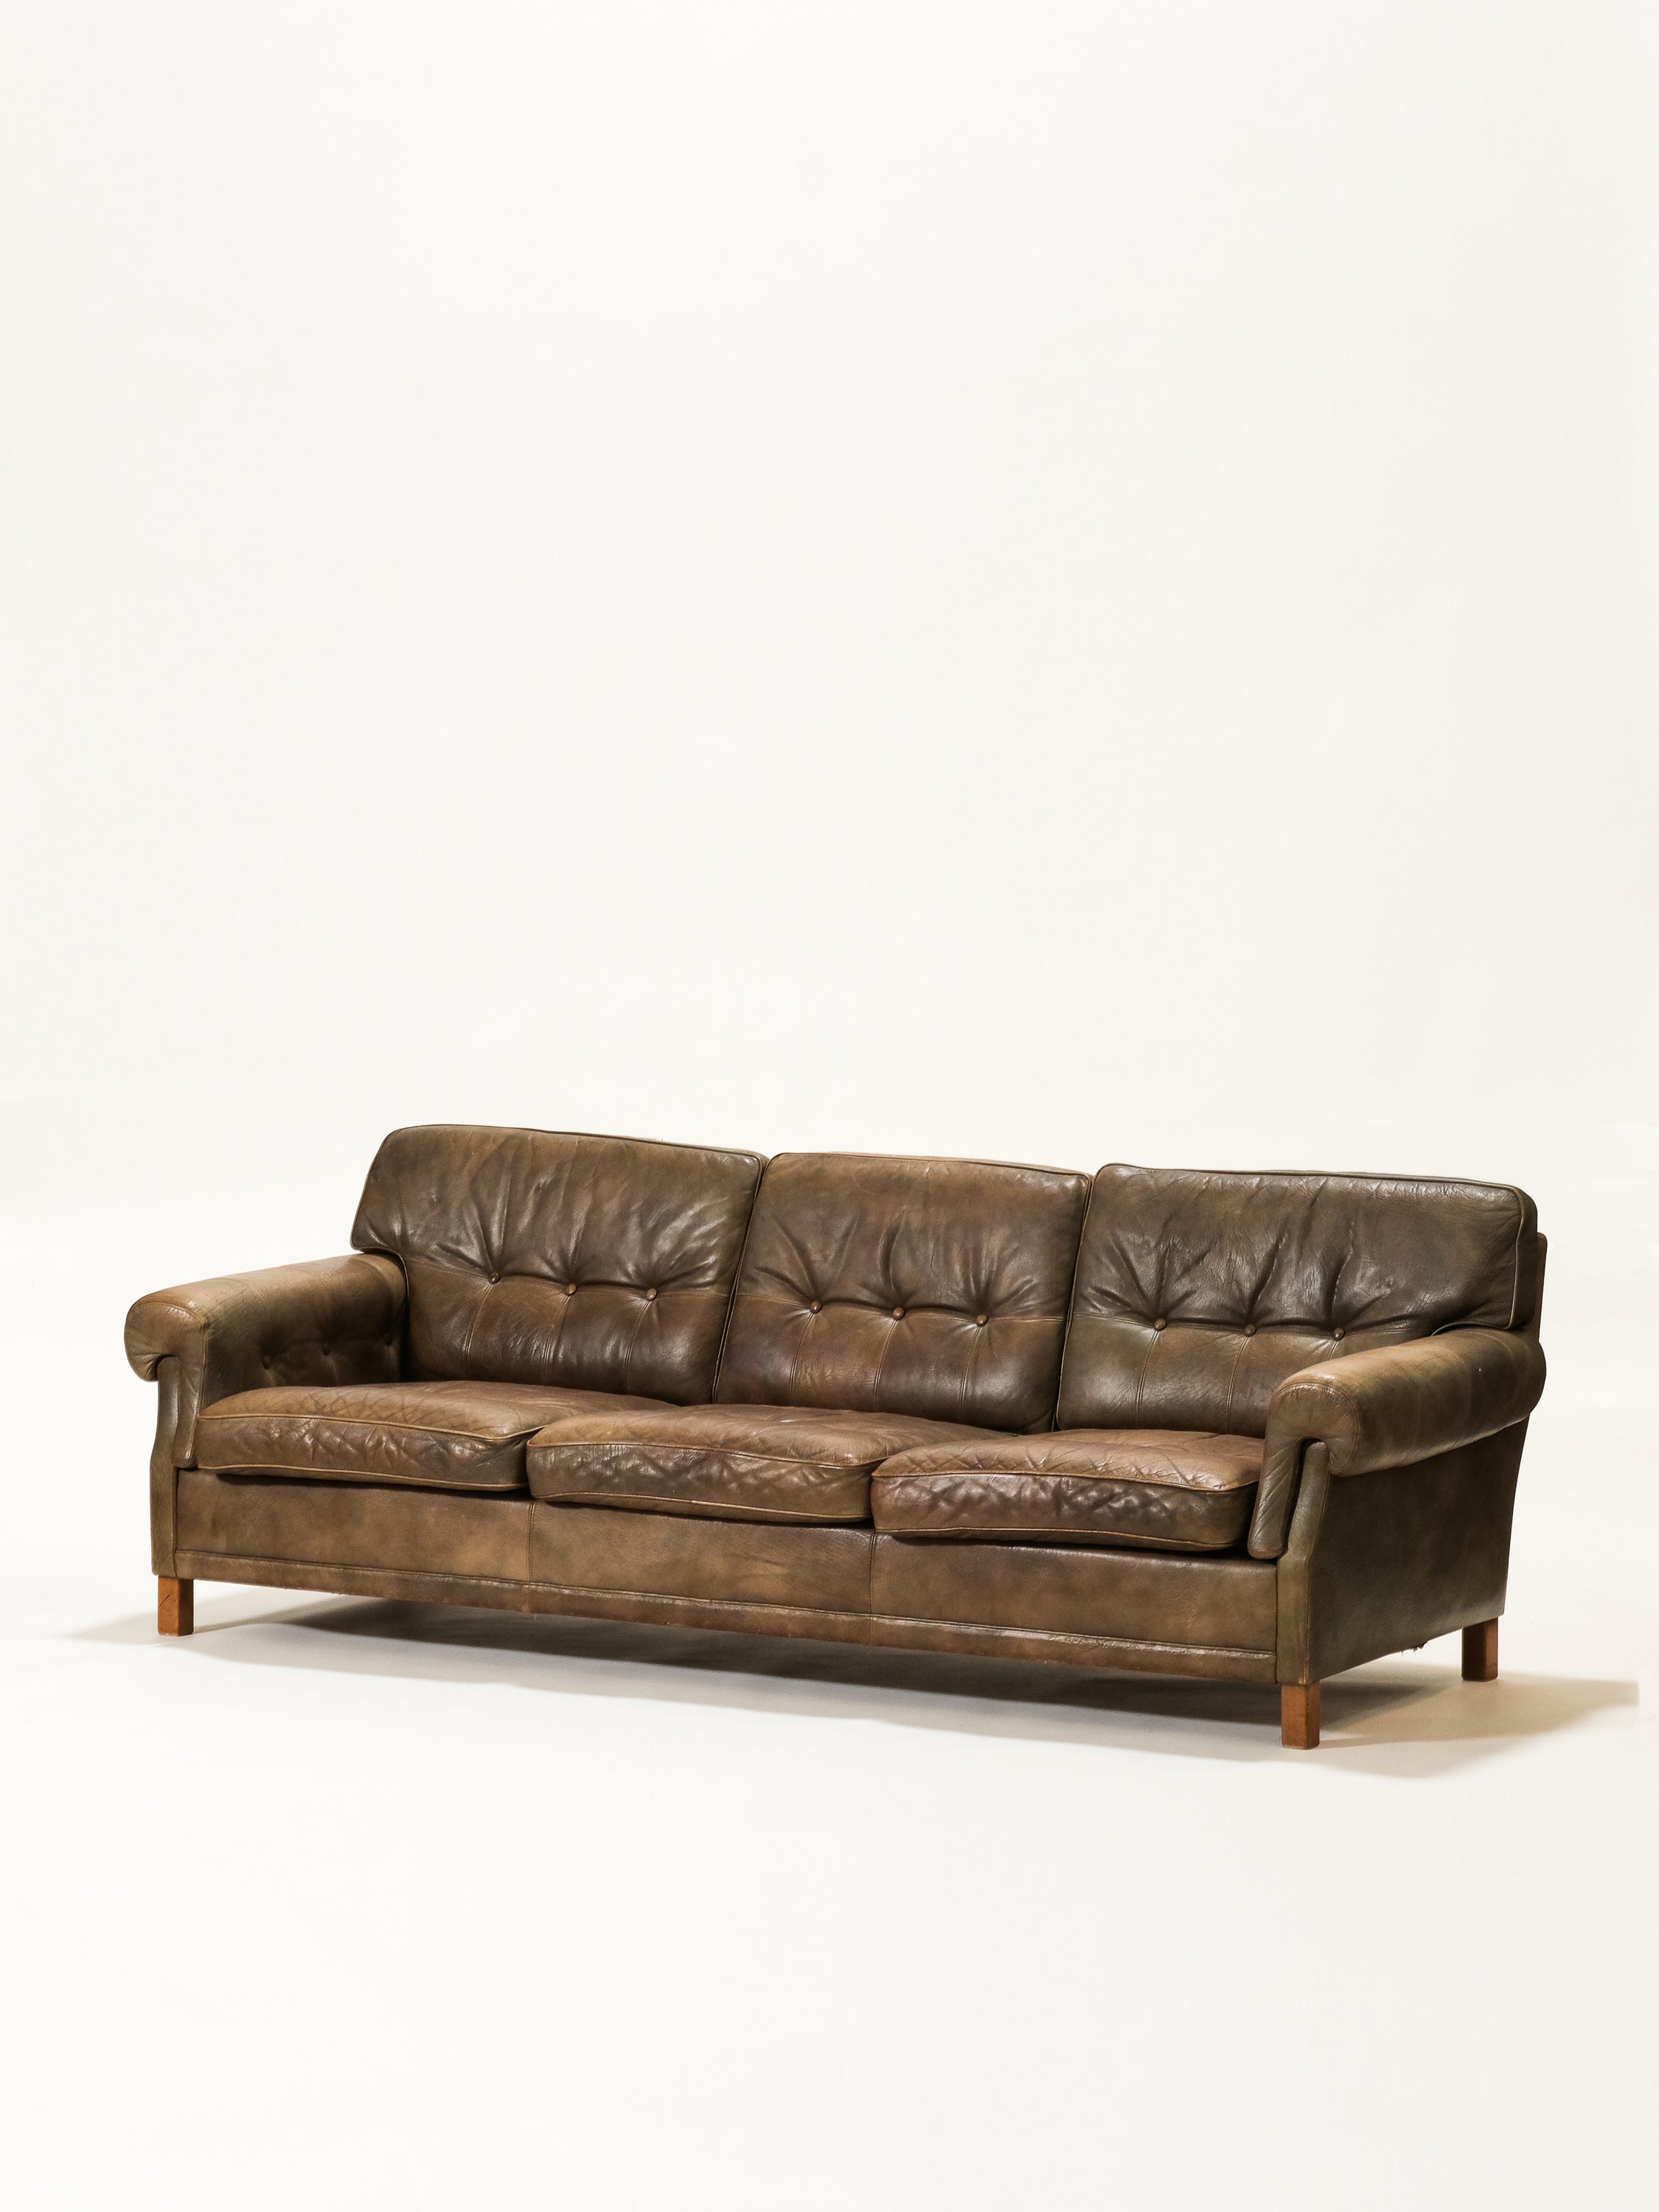 Swedish Leather Sofa from OPE, 1960s